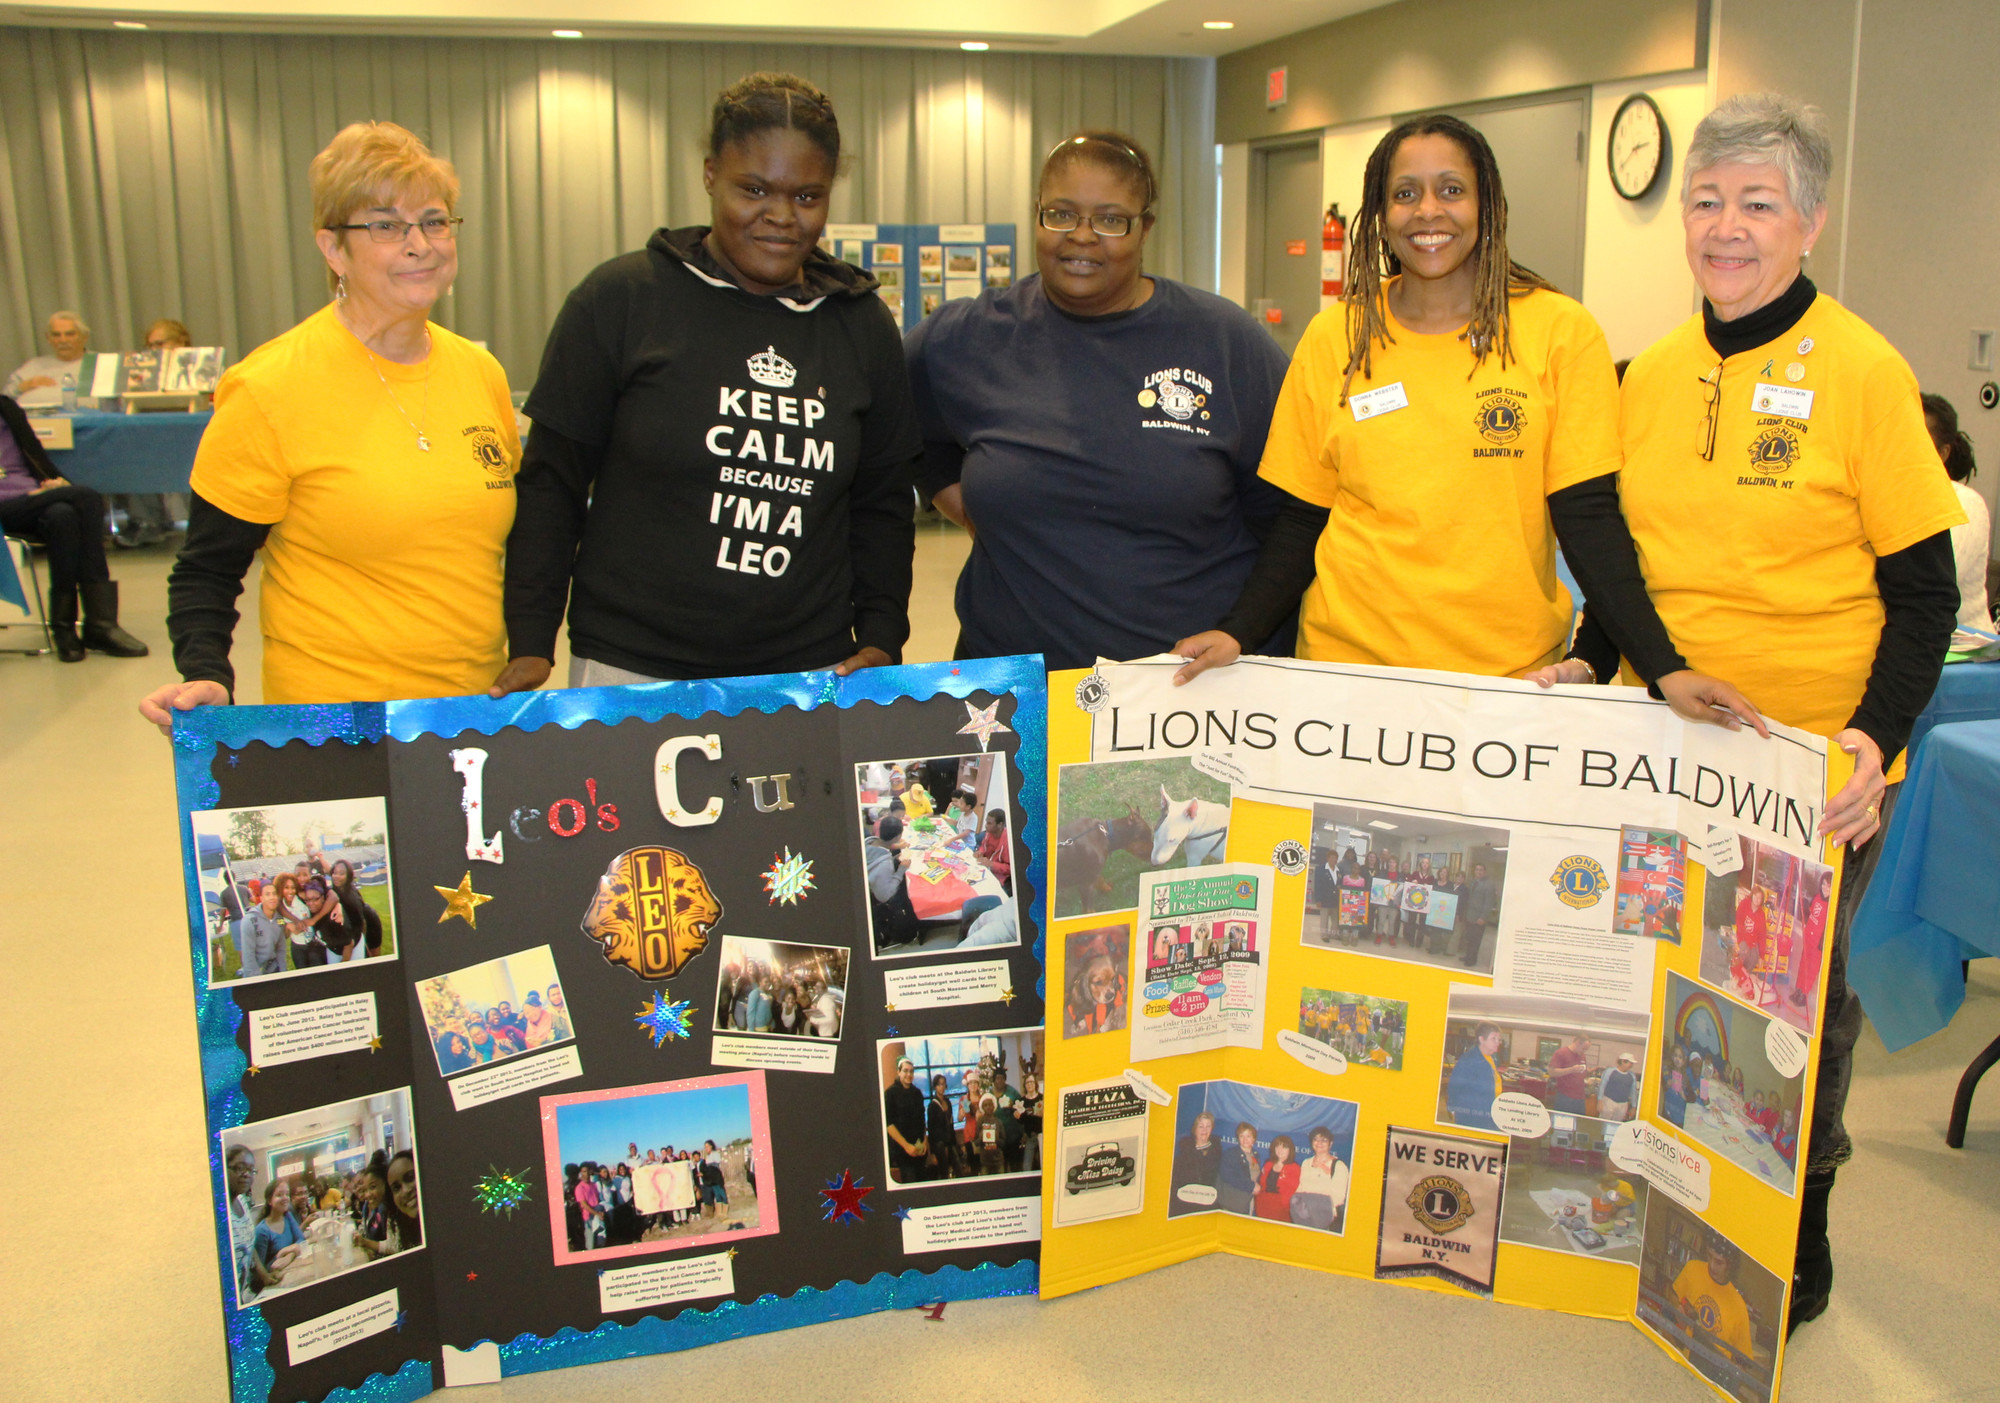 The Lions Club and Leo’s Club of Baldwin were on hand at the Volunteer Fair at Baldwin Public Library on Jan. 24. From left were Dianne Caltrano, Miranda Hinton, 15, Brenda Banks, Donna Webster and Joan Lahowin.